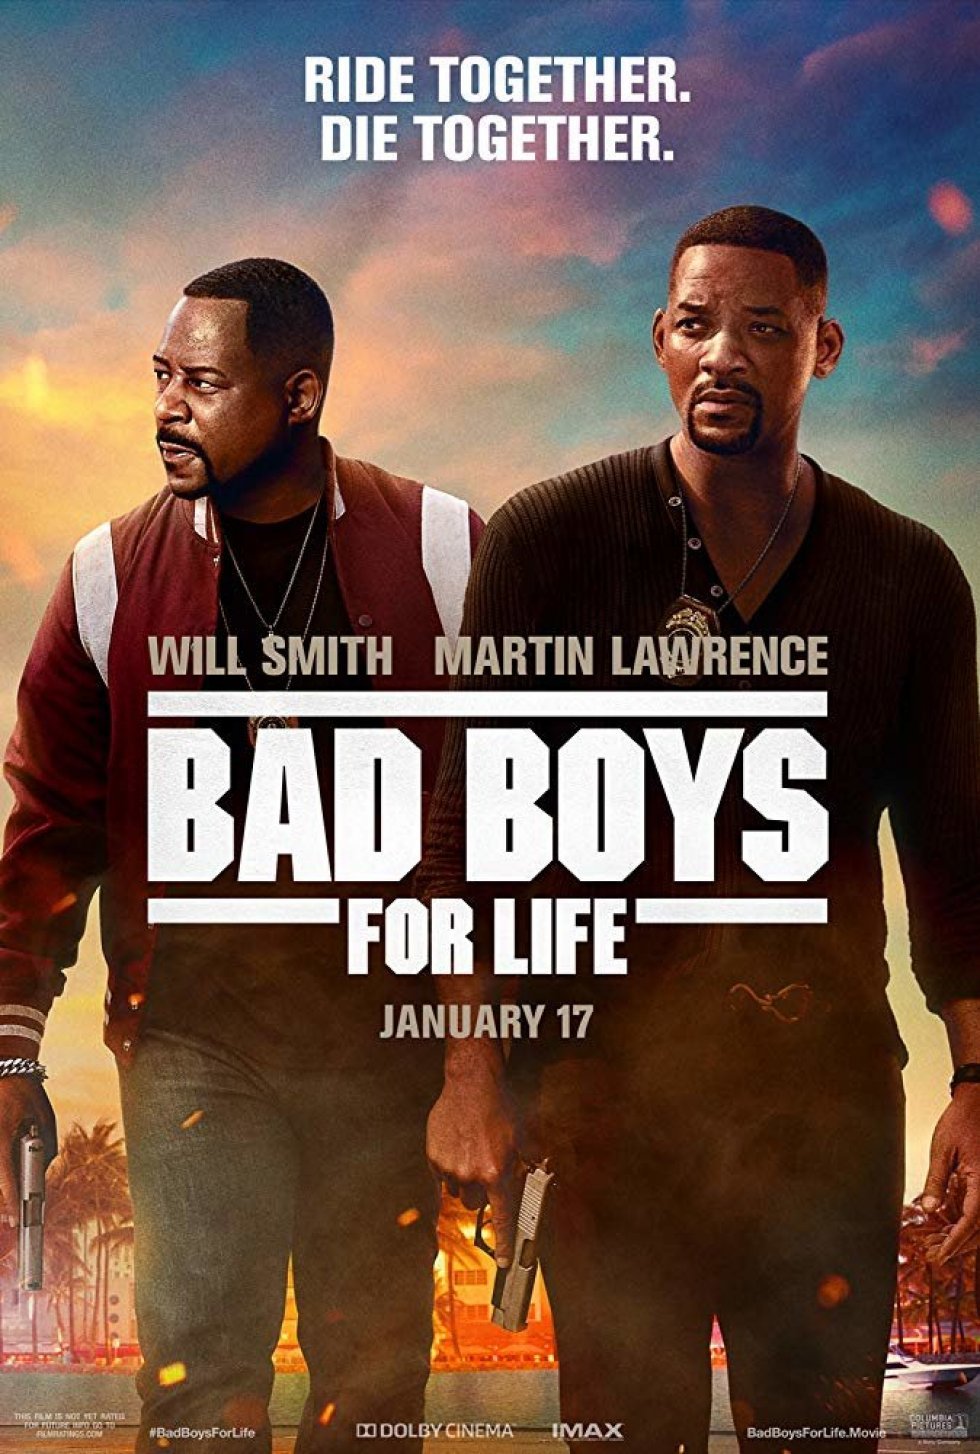 Sony Pictures - Bad Boys for Life (Anmeldelse)